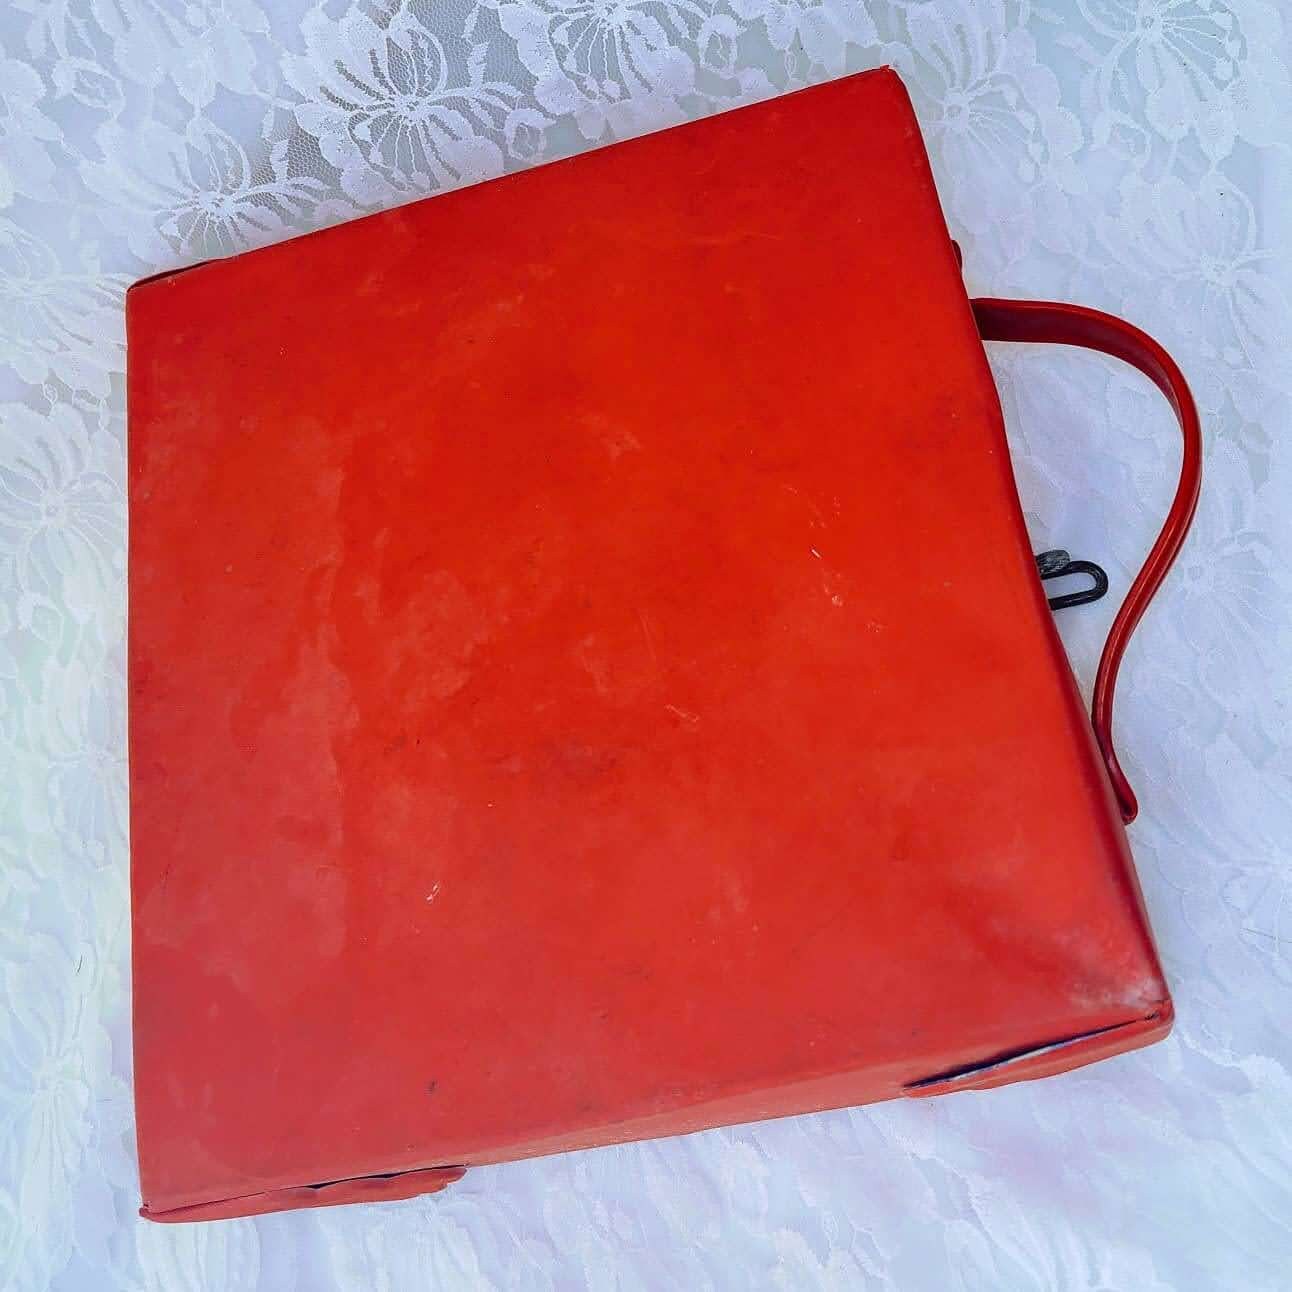 Collectible Doll Case ~ Vintage Vogue Ginny Doll Carrying Case ~ Red ~ 1960s Carrying Case ~ Armoire